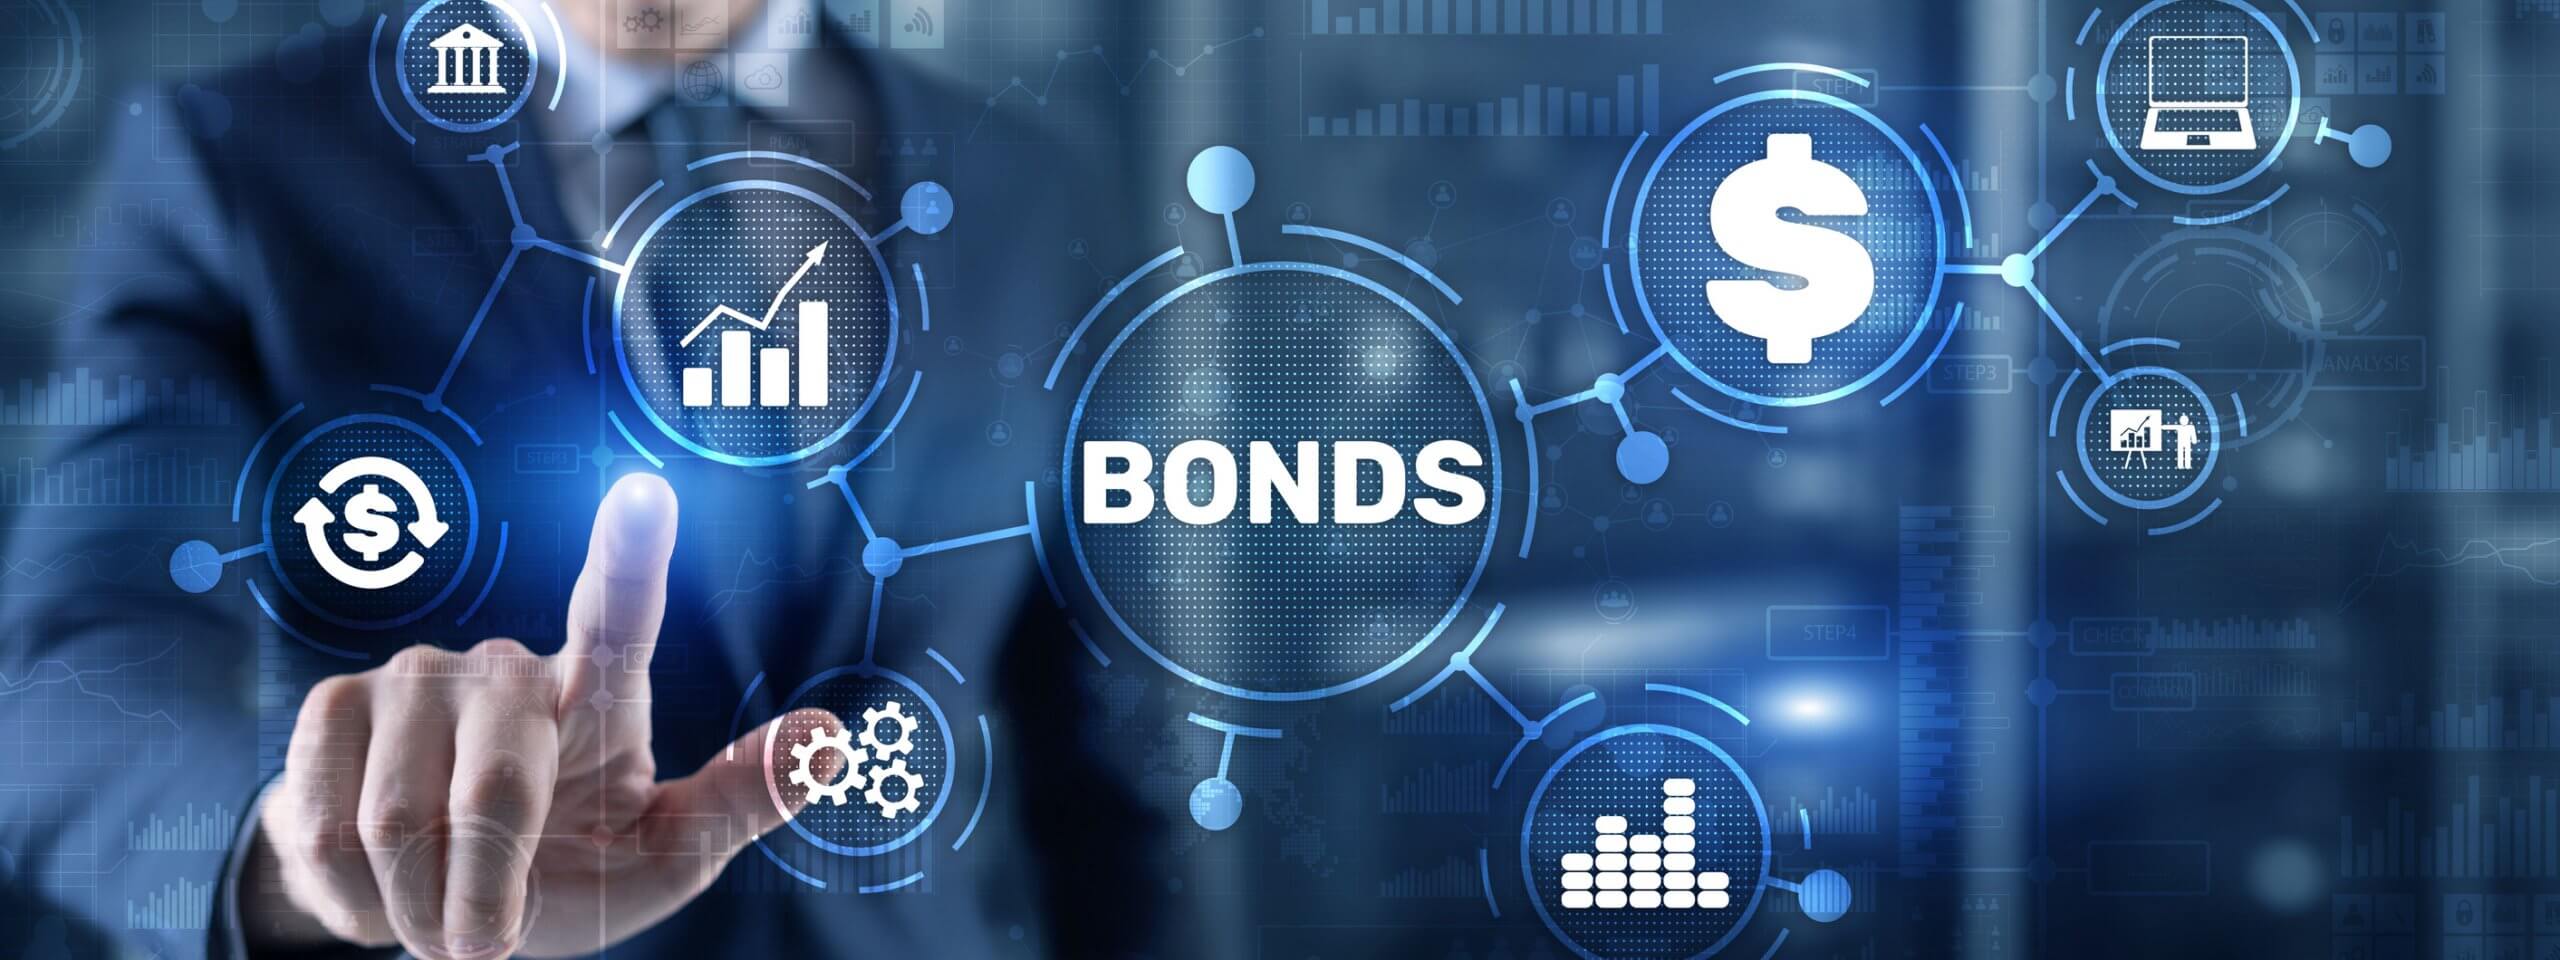 Learn About Bonds - Complete Controller